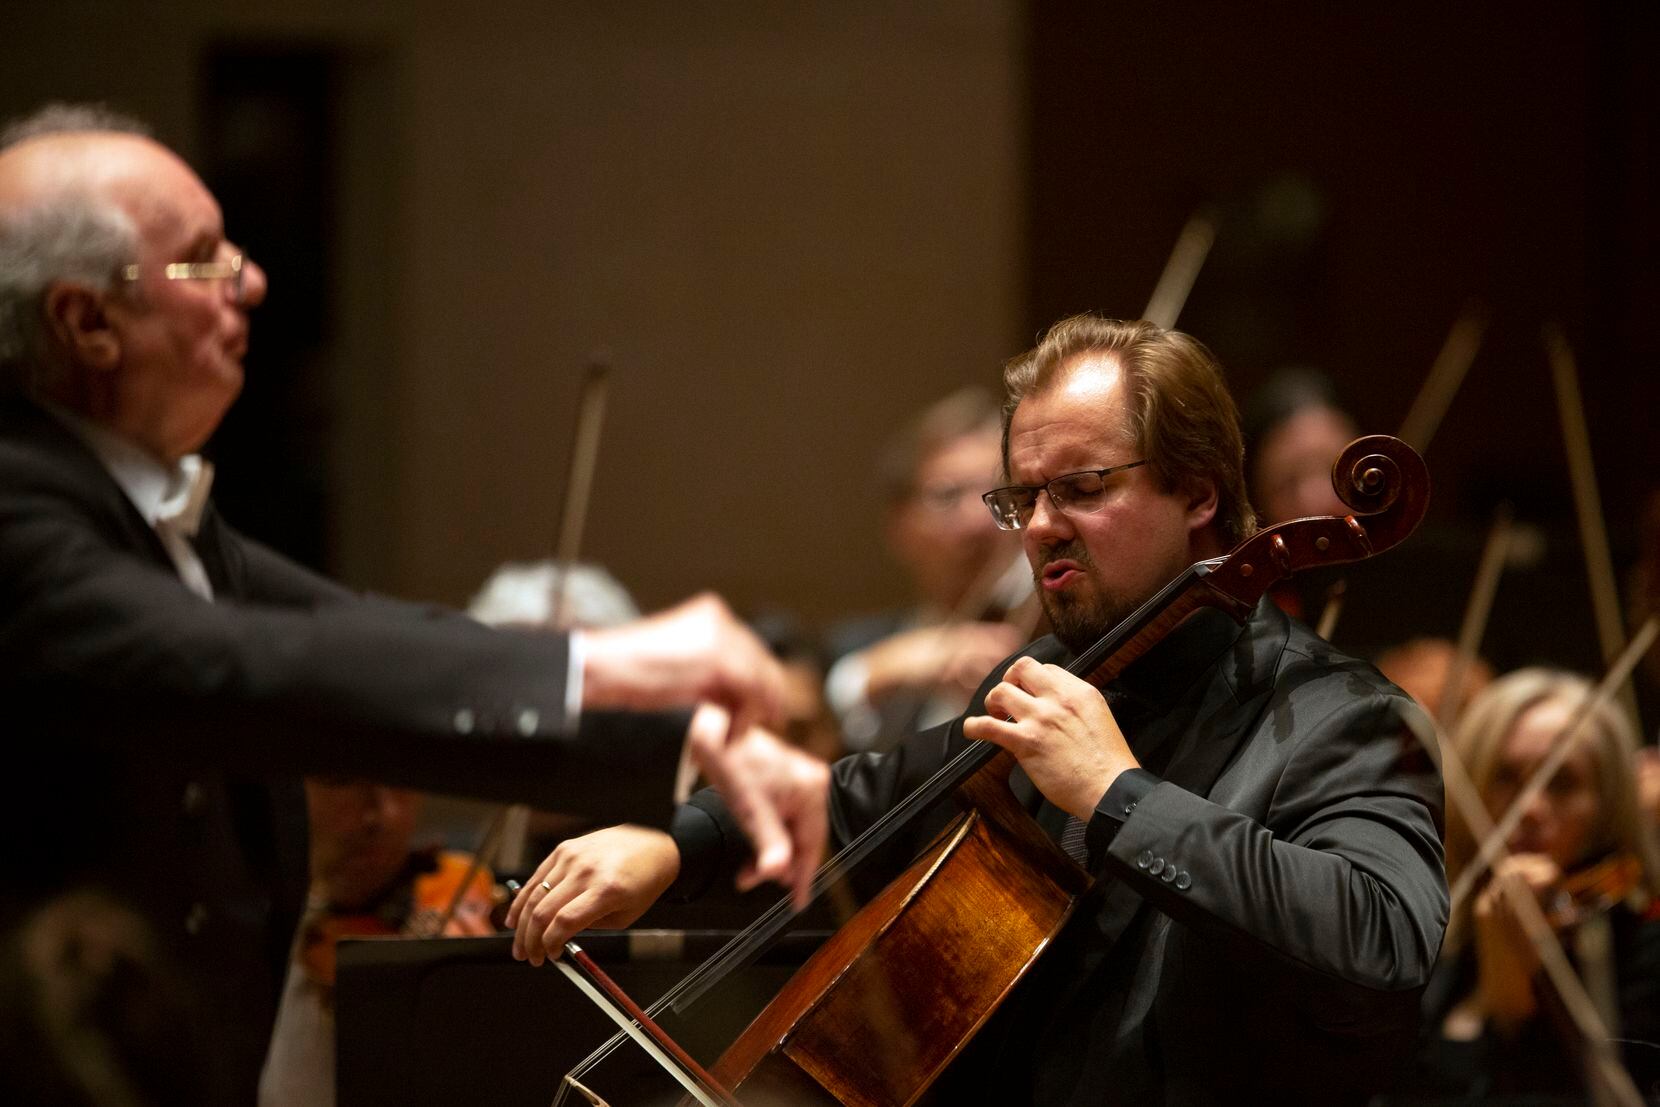 Cello soloist Wolfgang Emanuel Schmidt performs at the Meyerson Symphony Center in Dallas on...